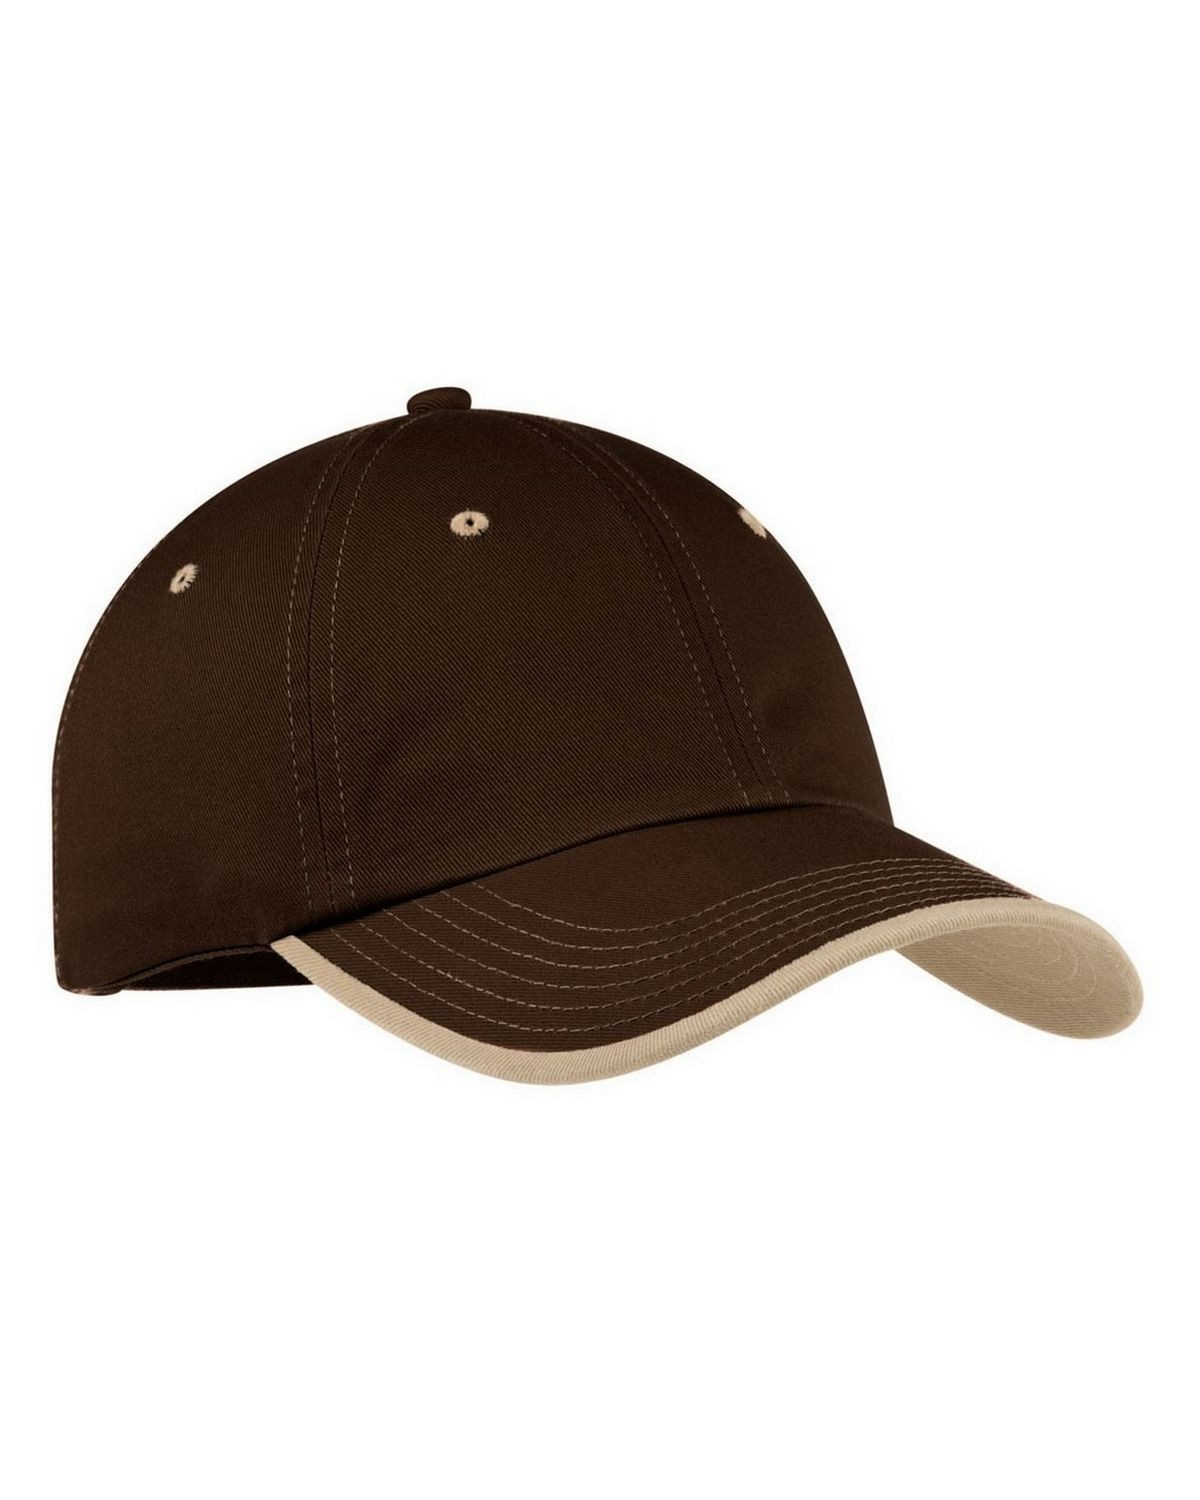 Port Authority C835 Vintage Washed Contrast Stitch Cap - Brown/Stone - One Size #vintage